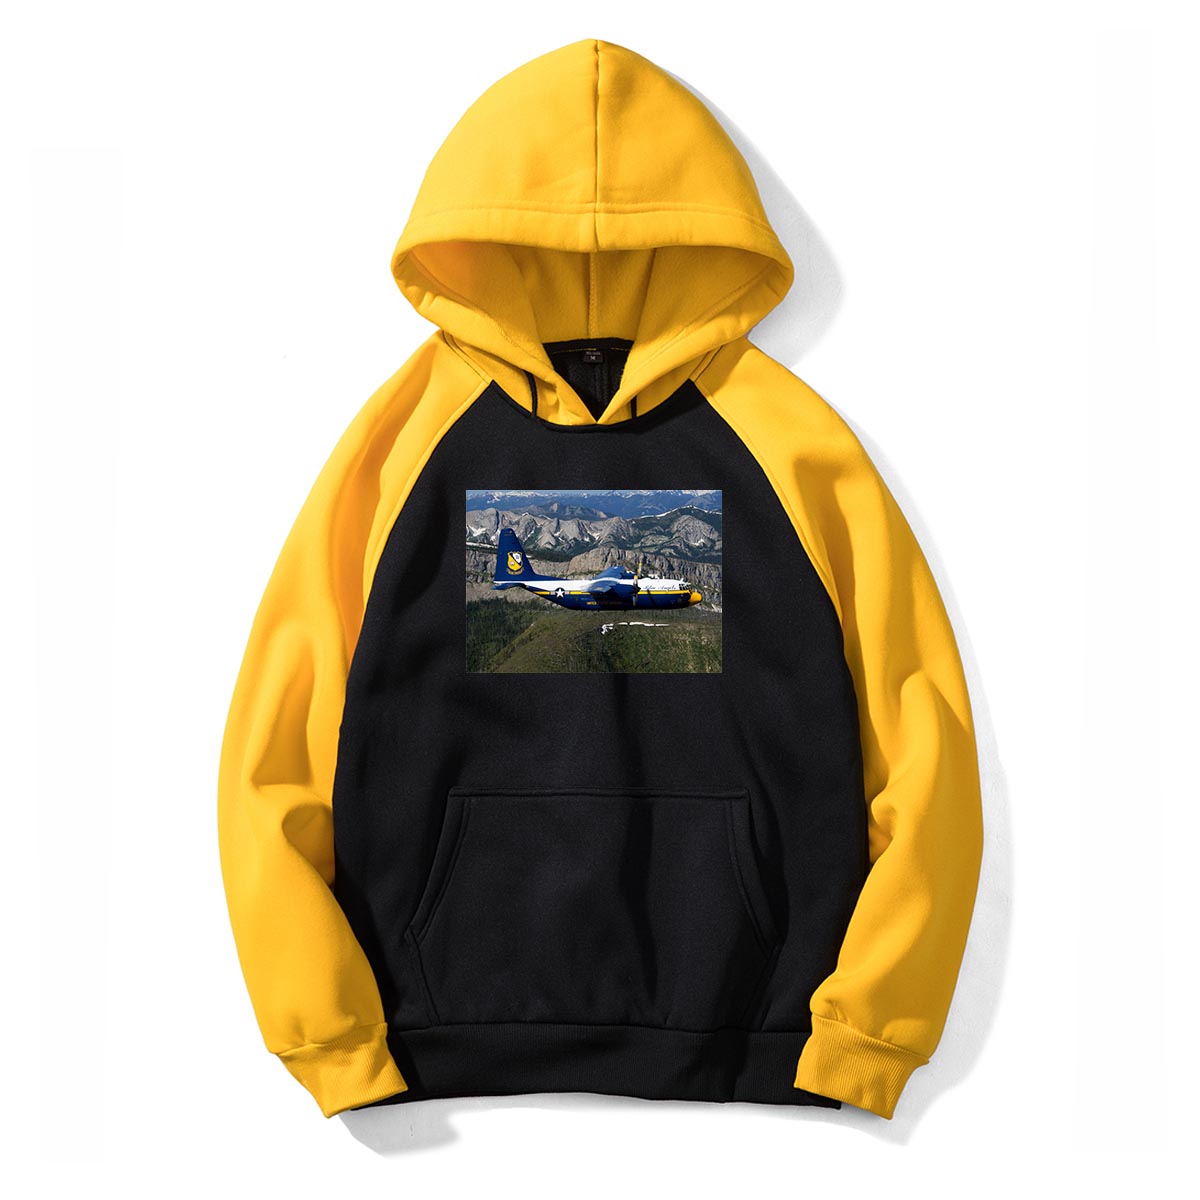 Amazing View with Blue Angels Aircraft Designed Colourful Hoodies